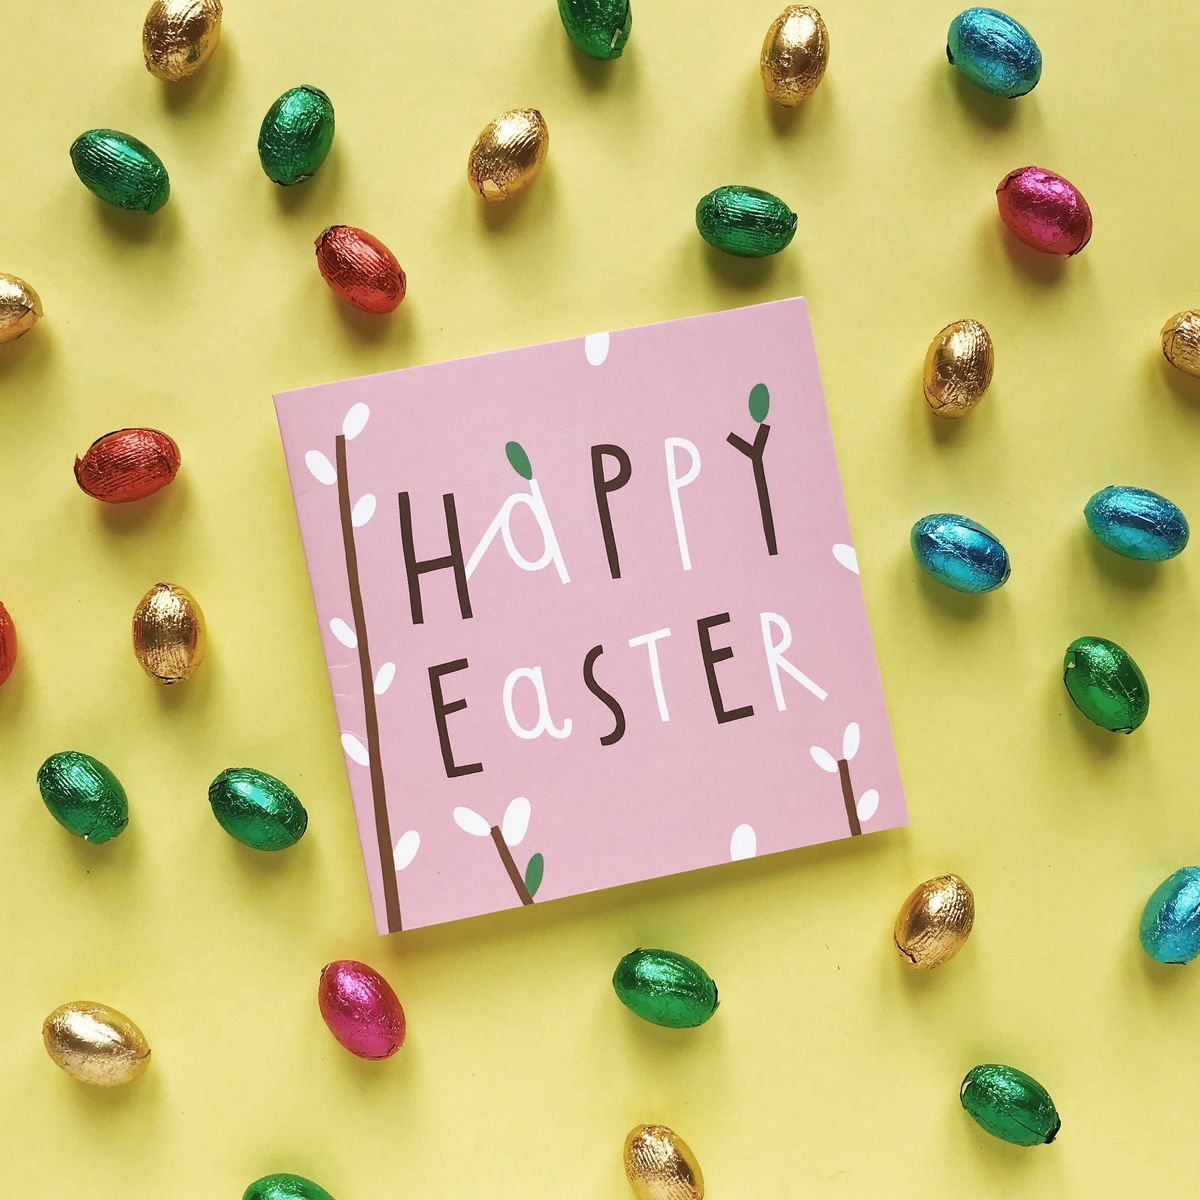 Happy Easter Wishes: 41 Easter Card Messages and Wishes